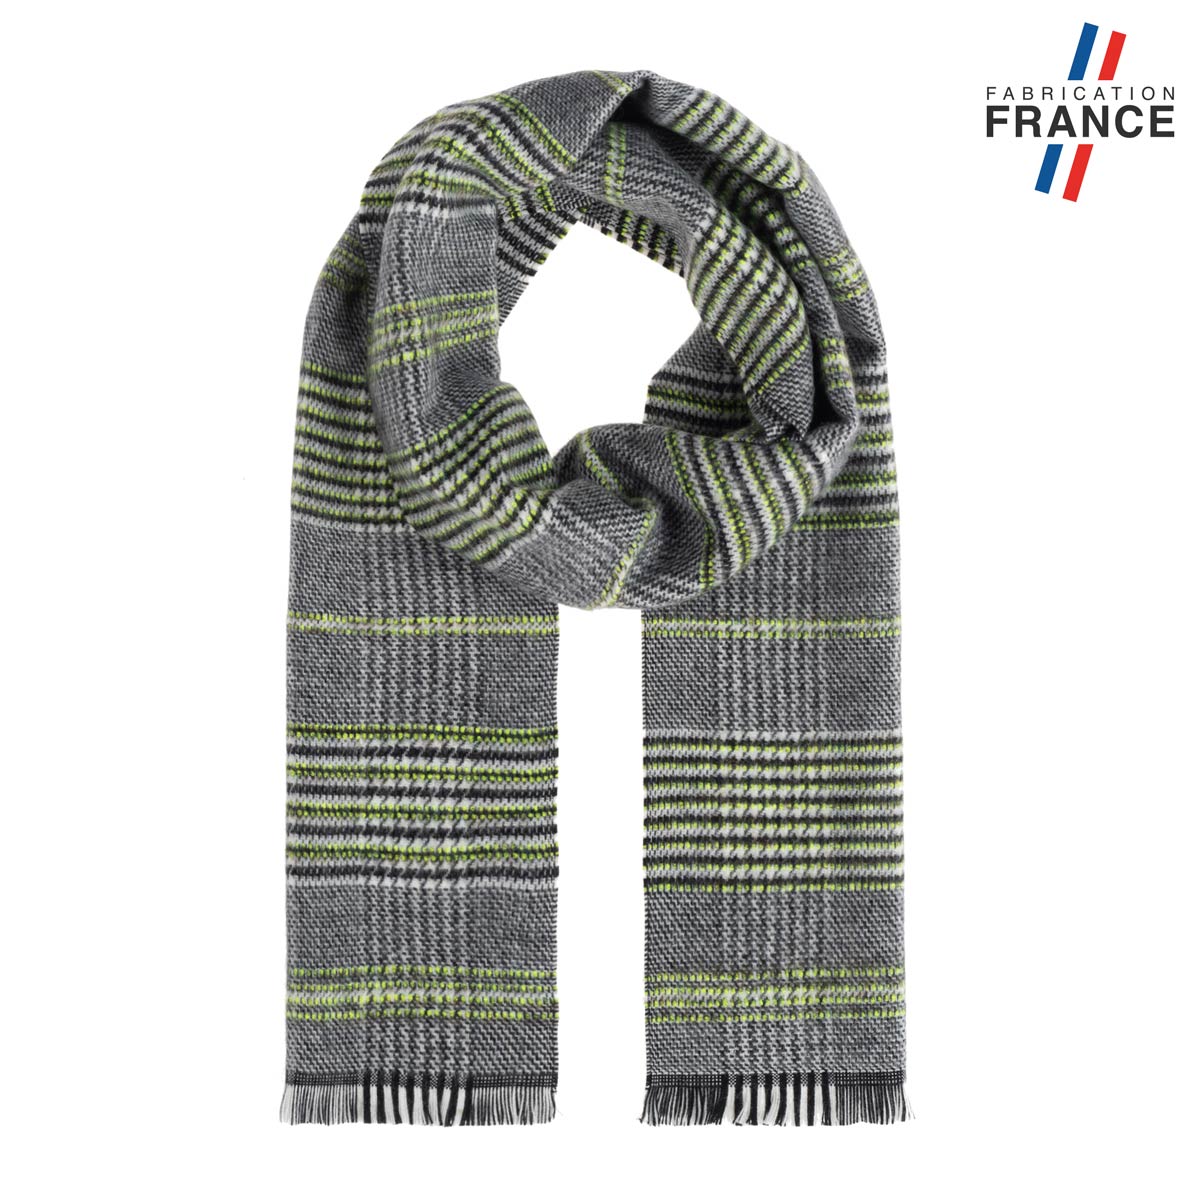 Echarpe-hiver-jaune-noire-made-in-france--AT-06687_F12-1FR